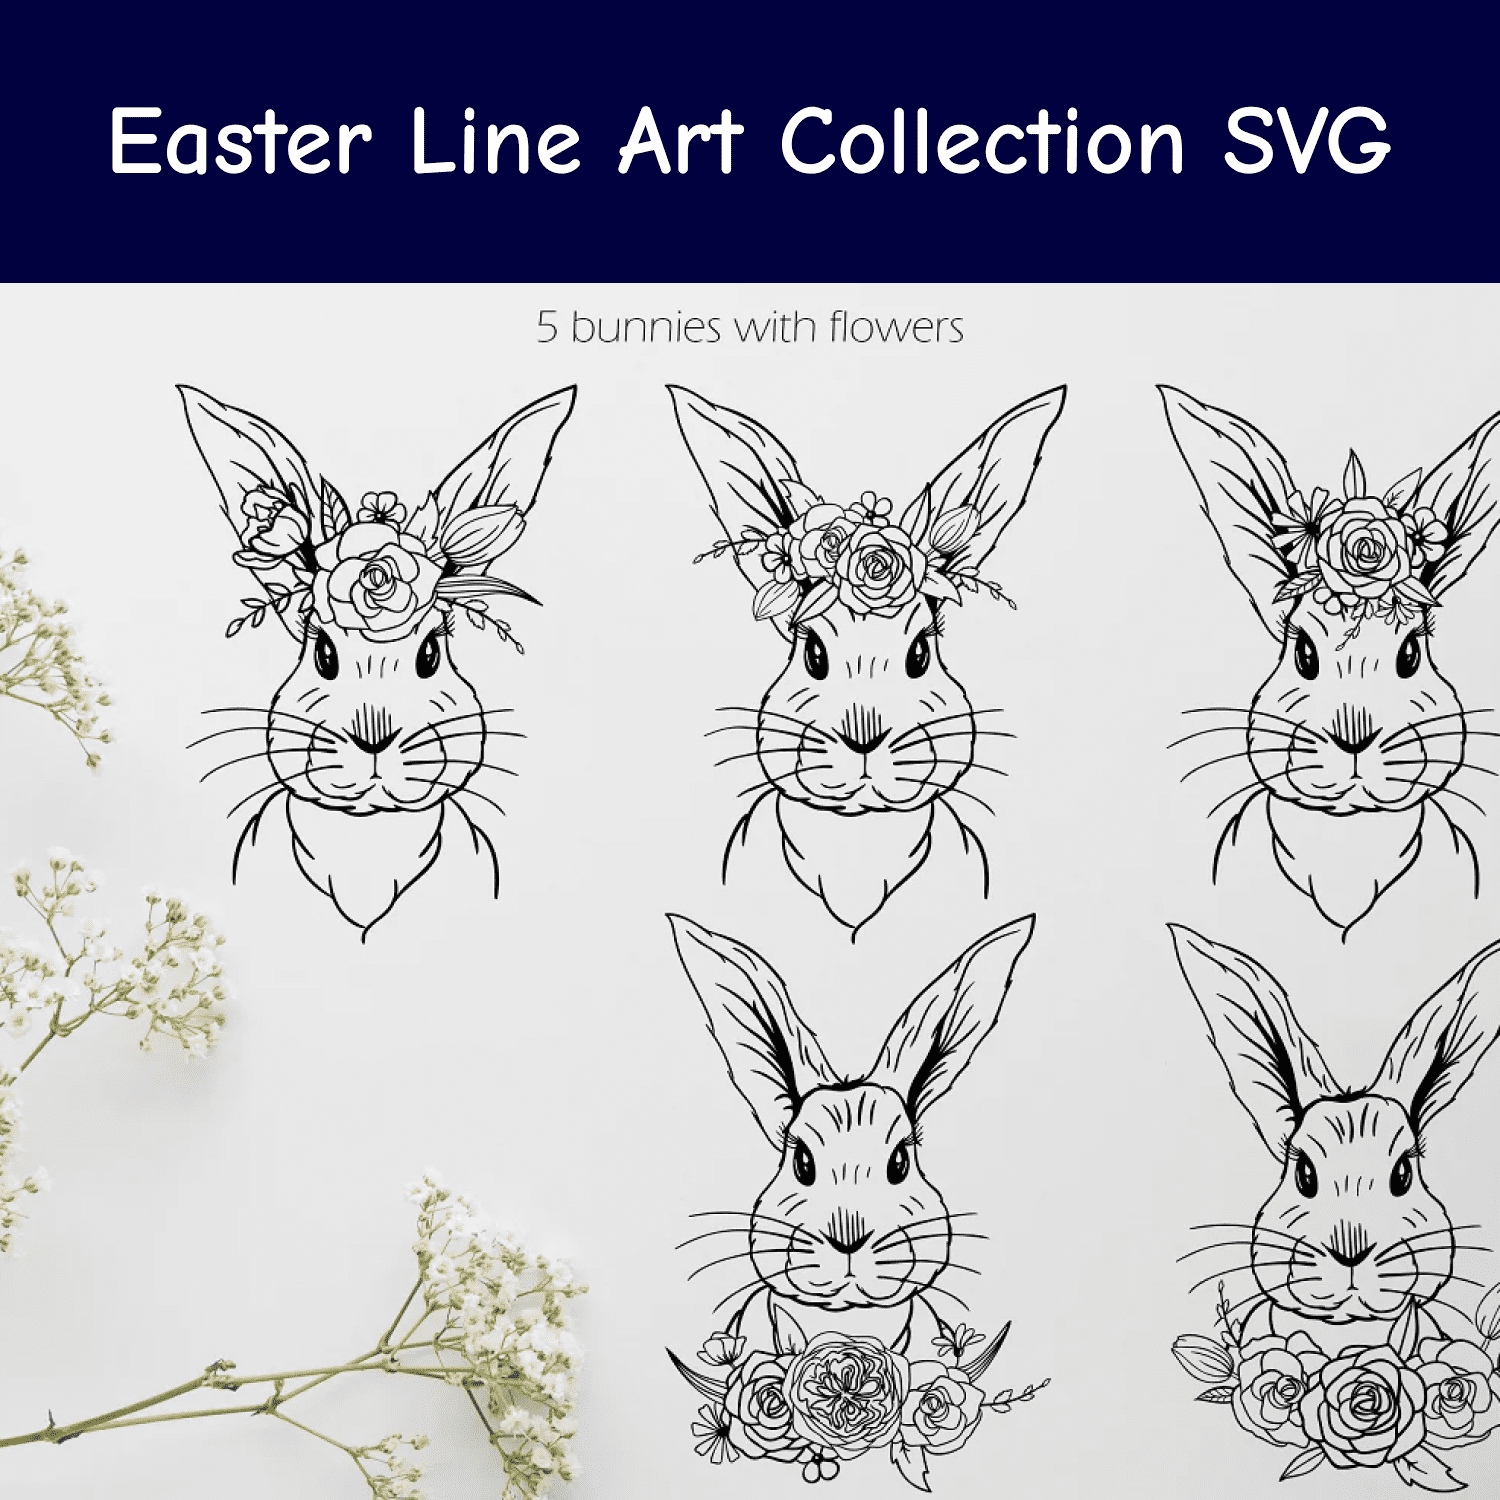 Easter Line Art Collection SVG cover.